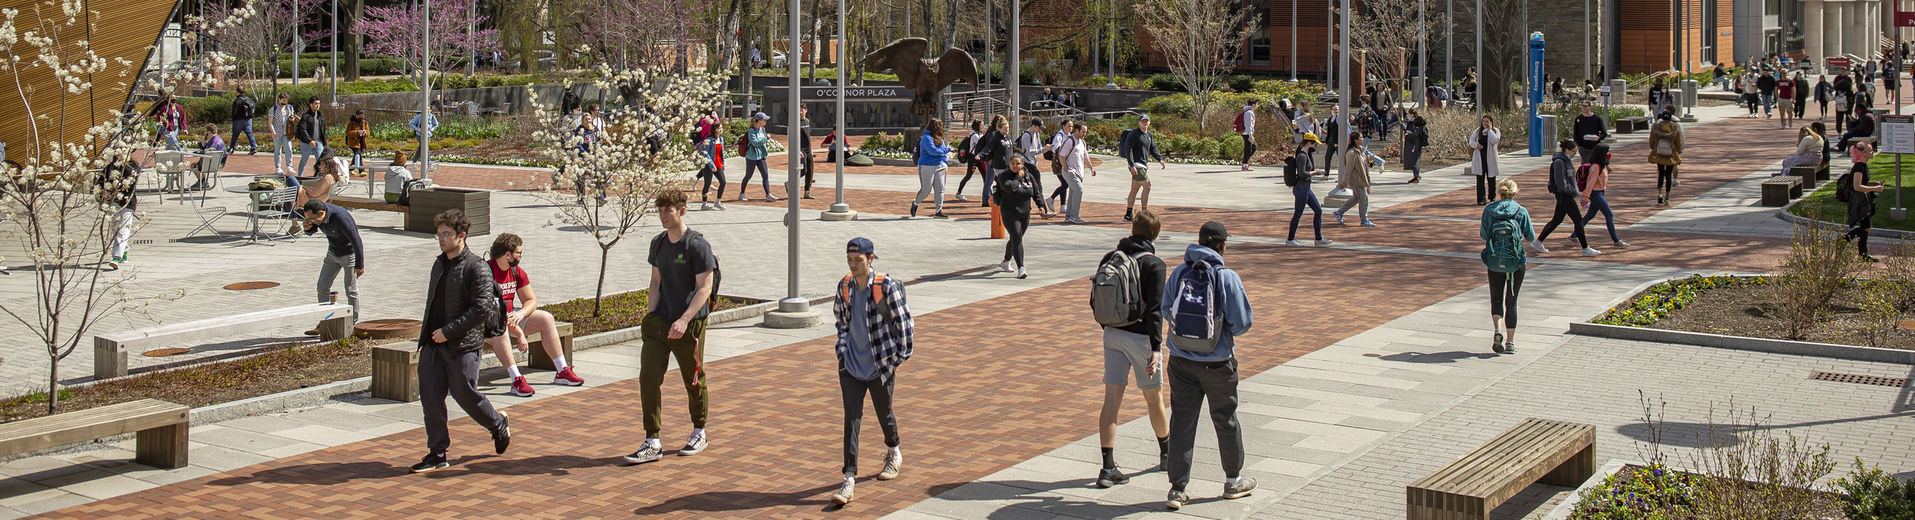 students walking across campus on a spring day.